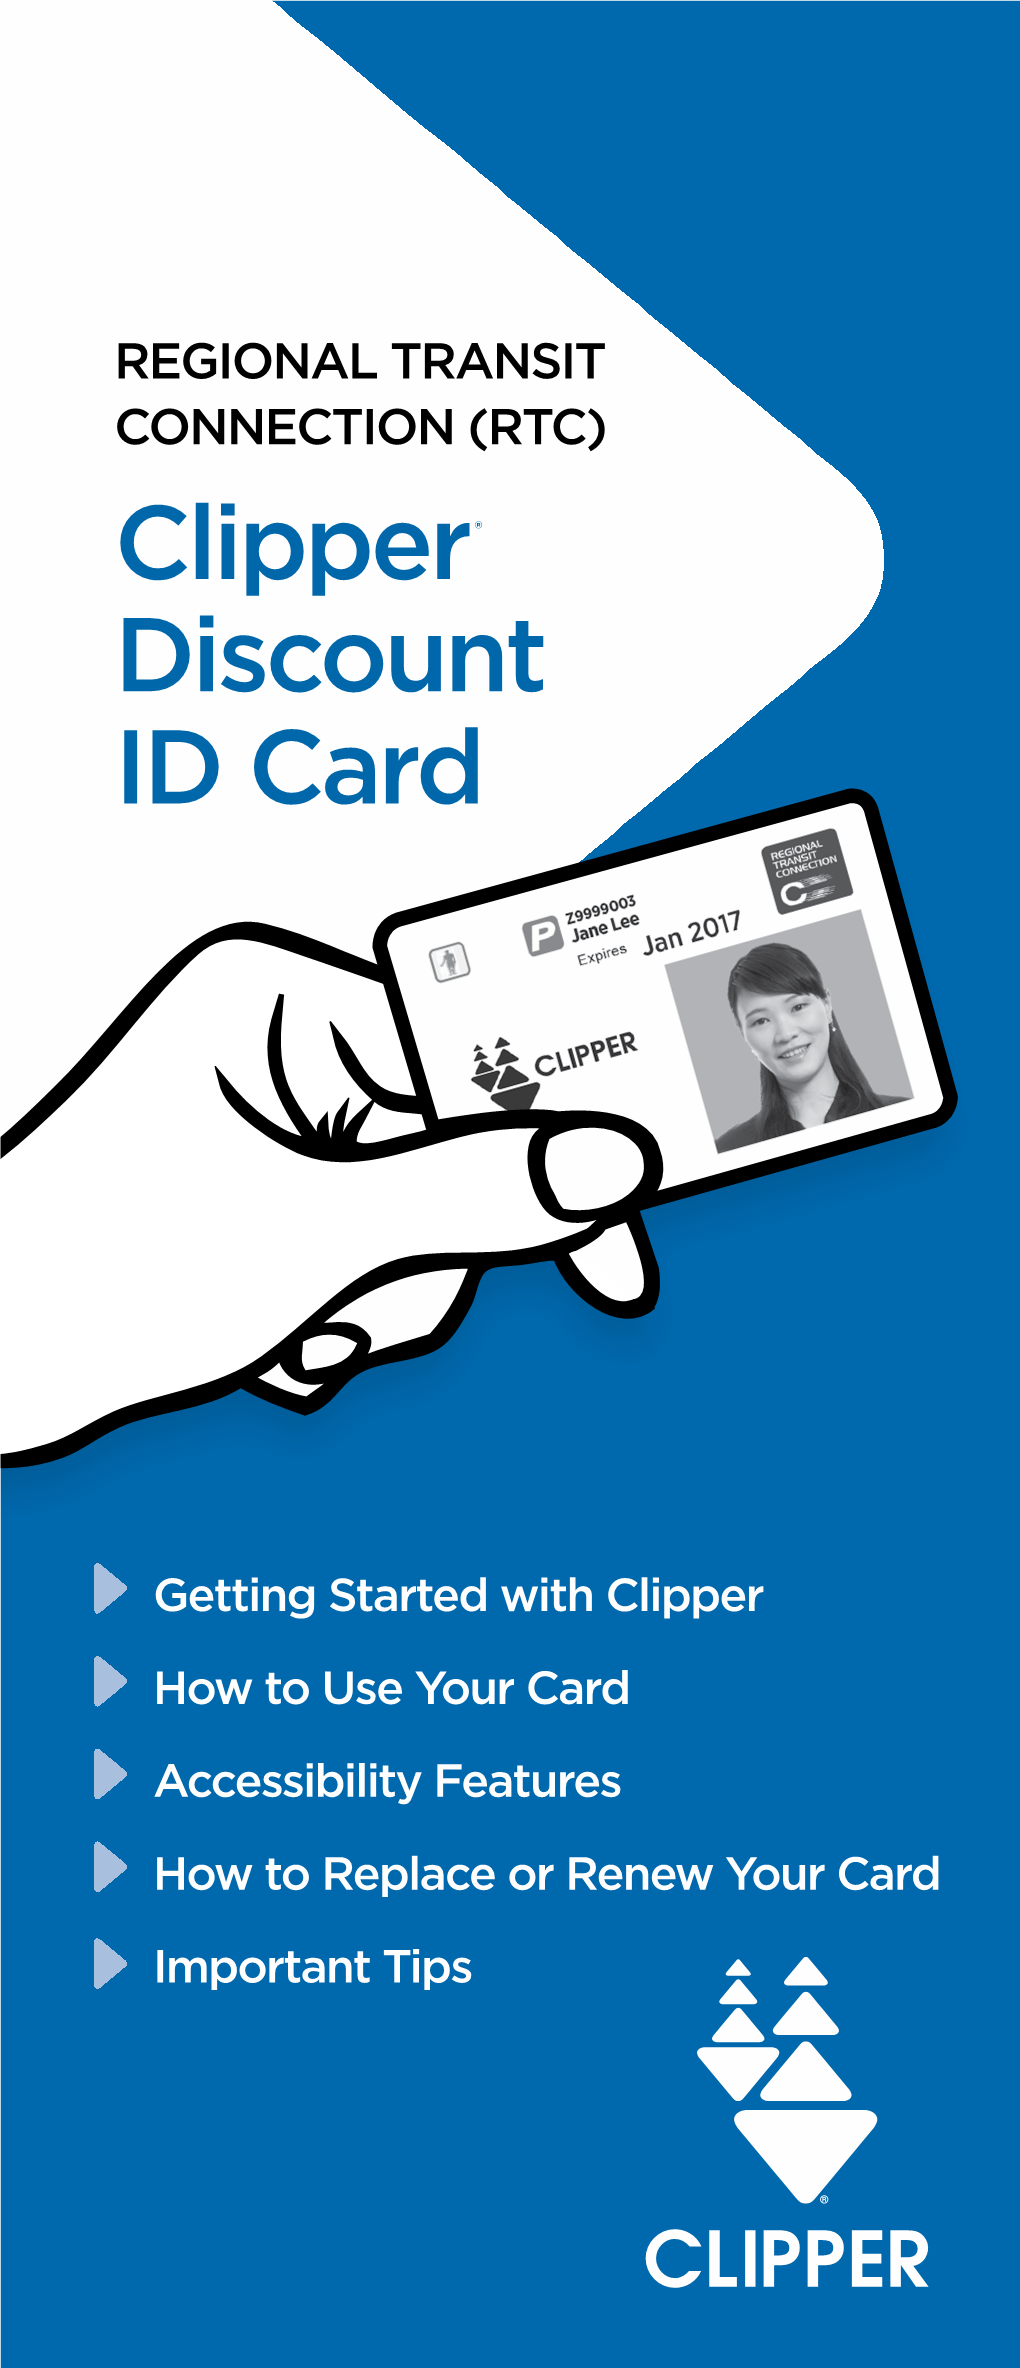 How to Use Your Clipper Card